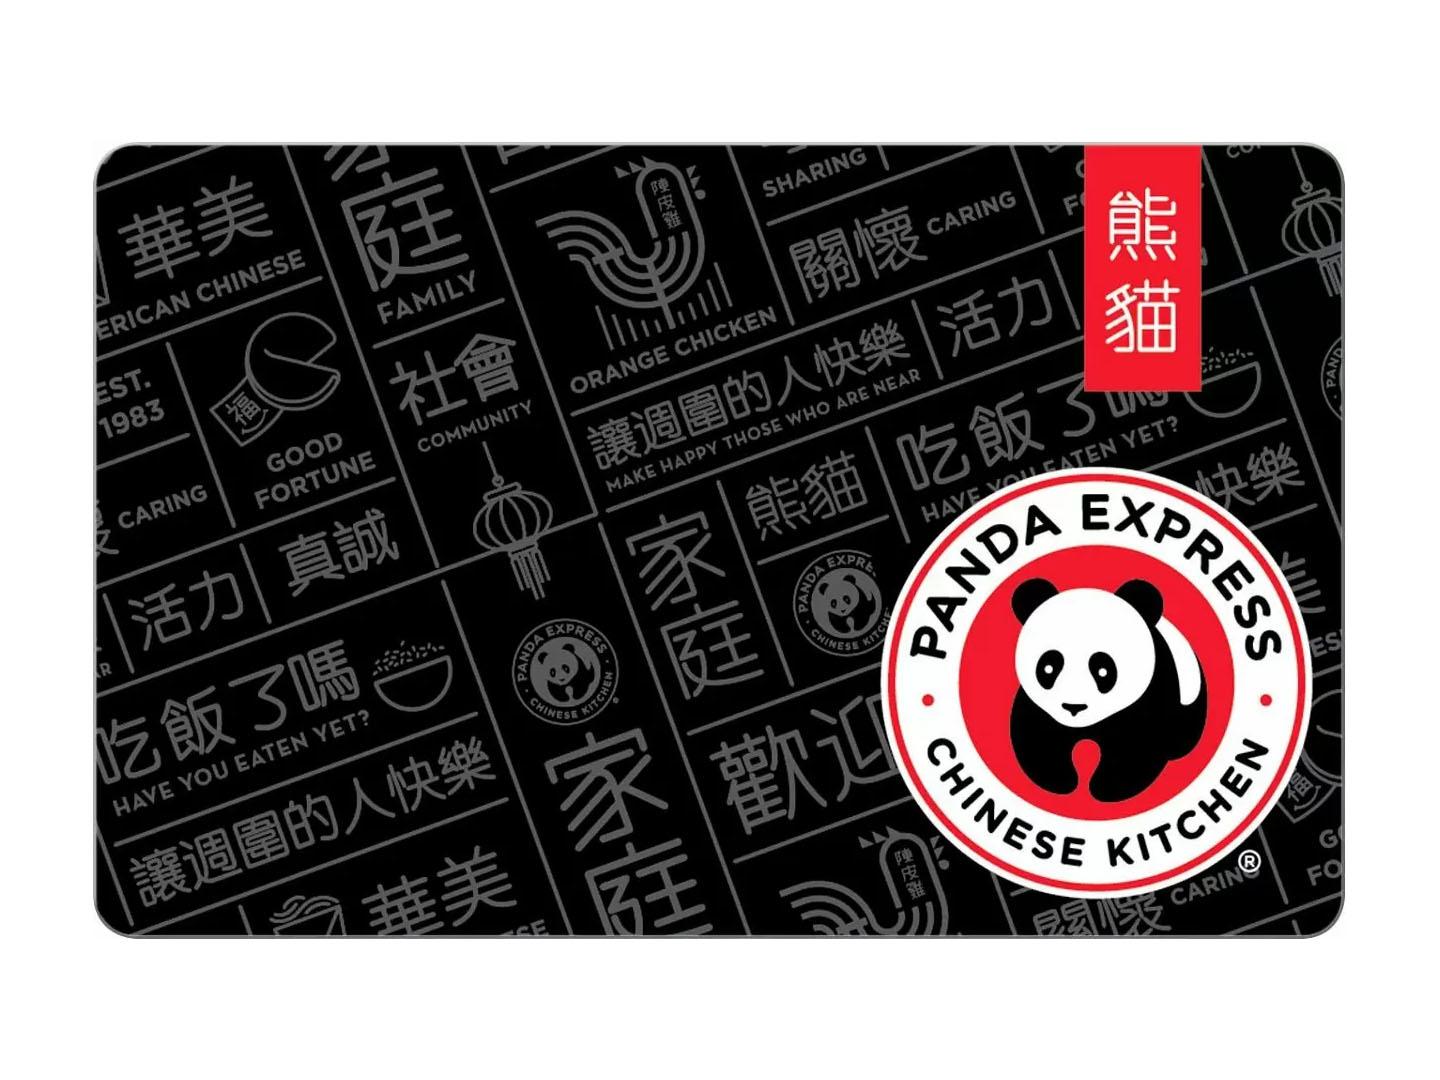 Panda Express Gift Cards for 20% Off